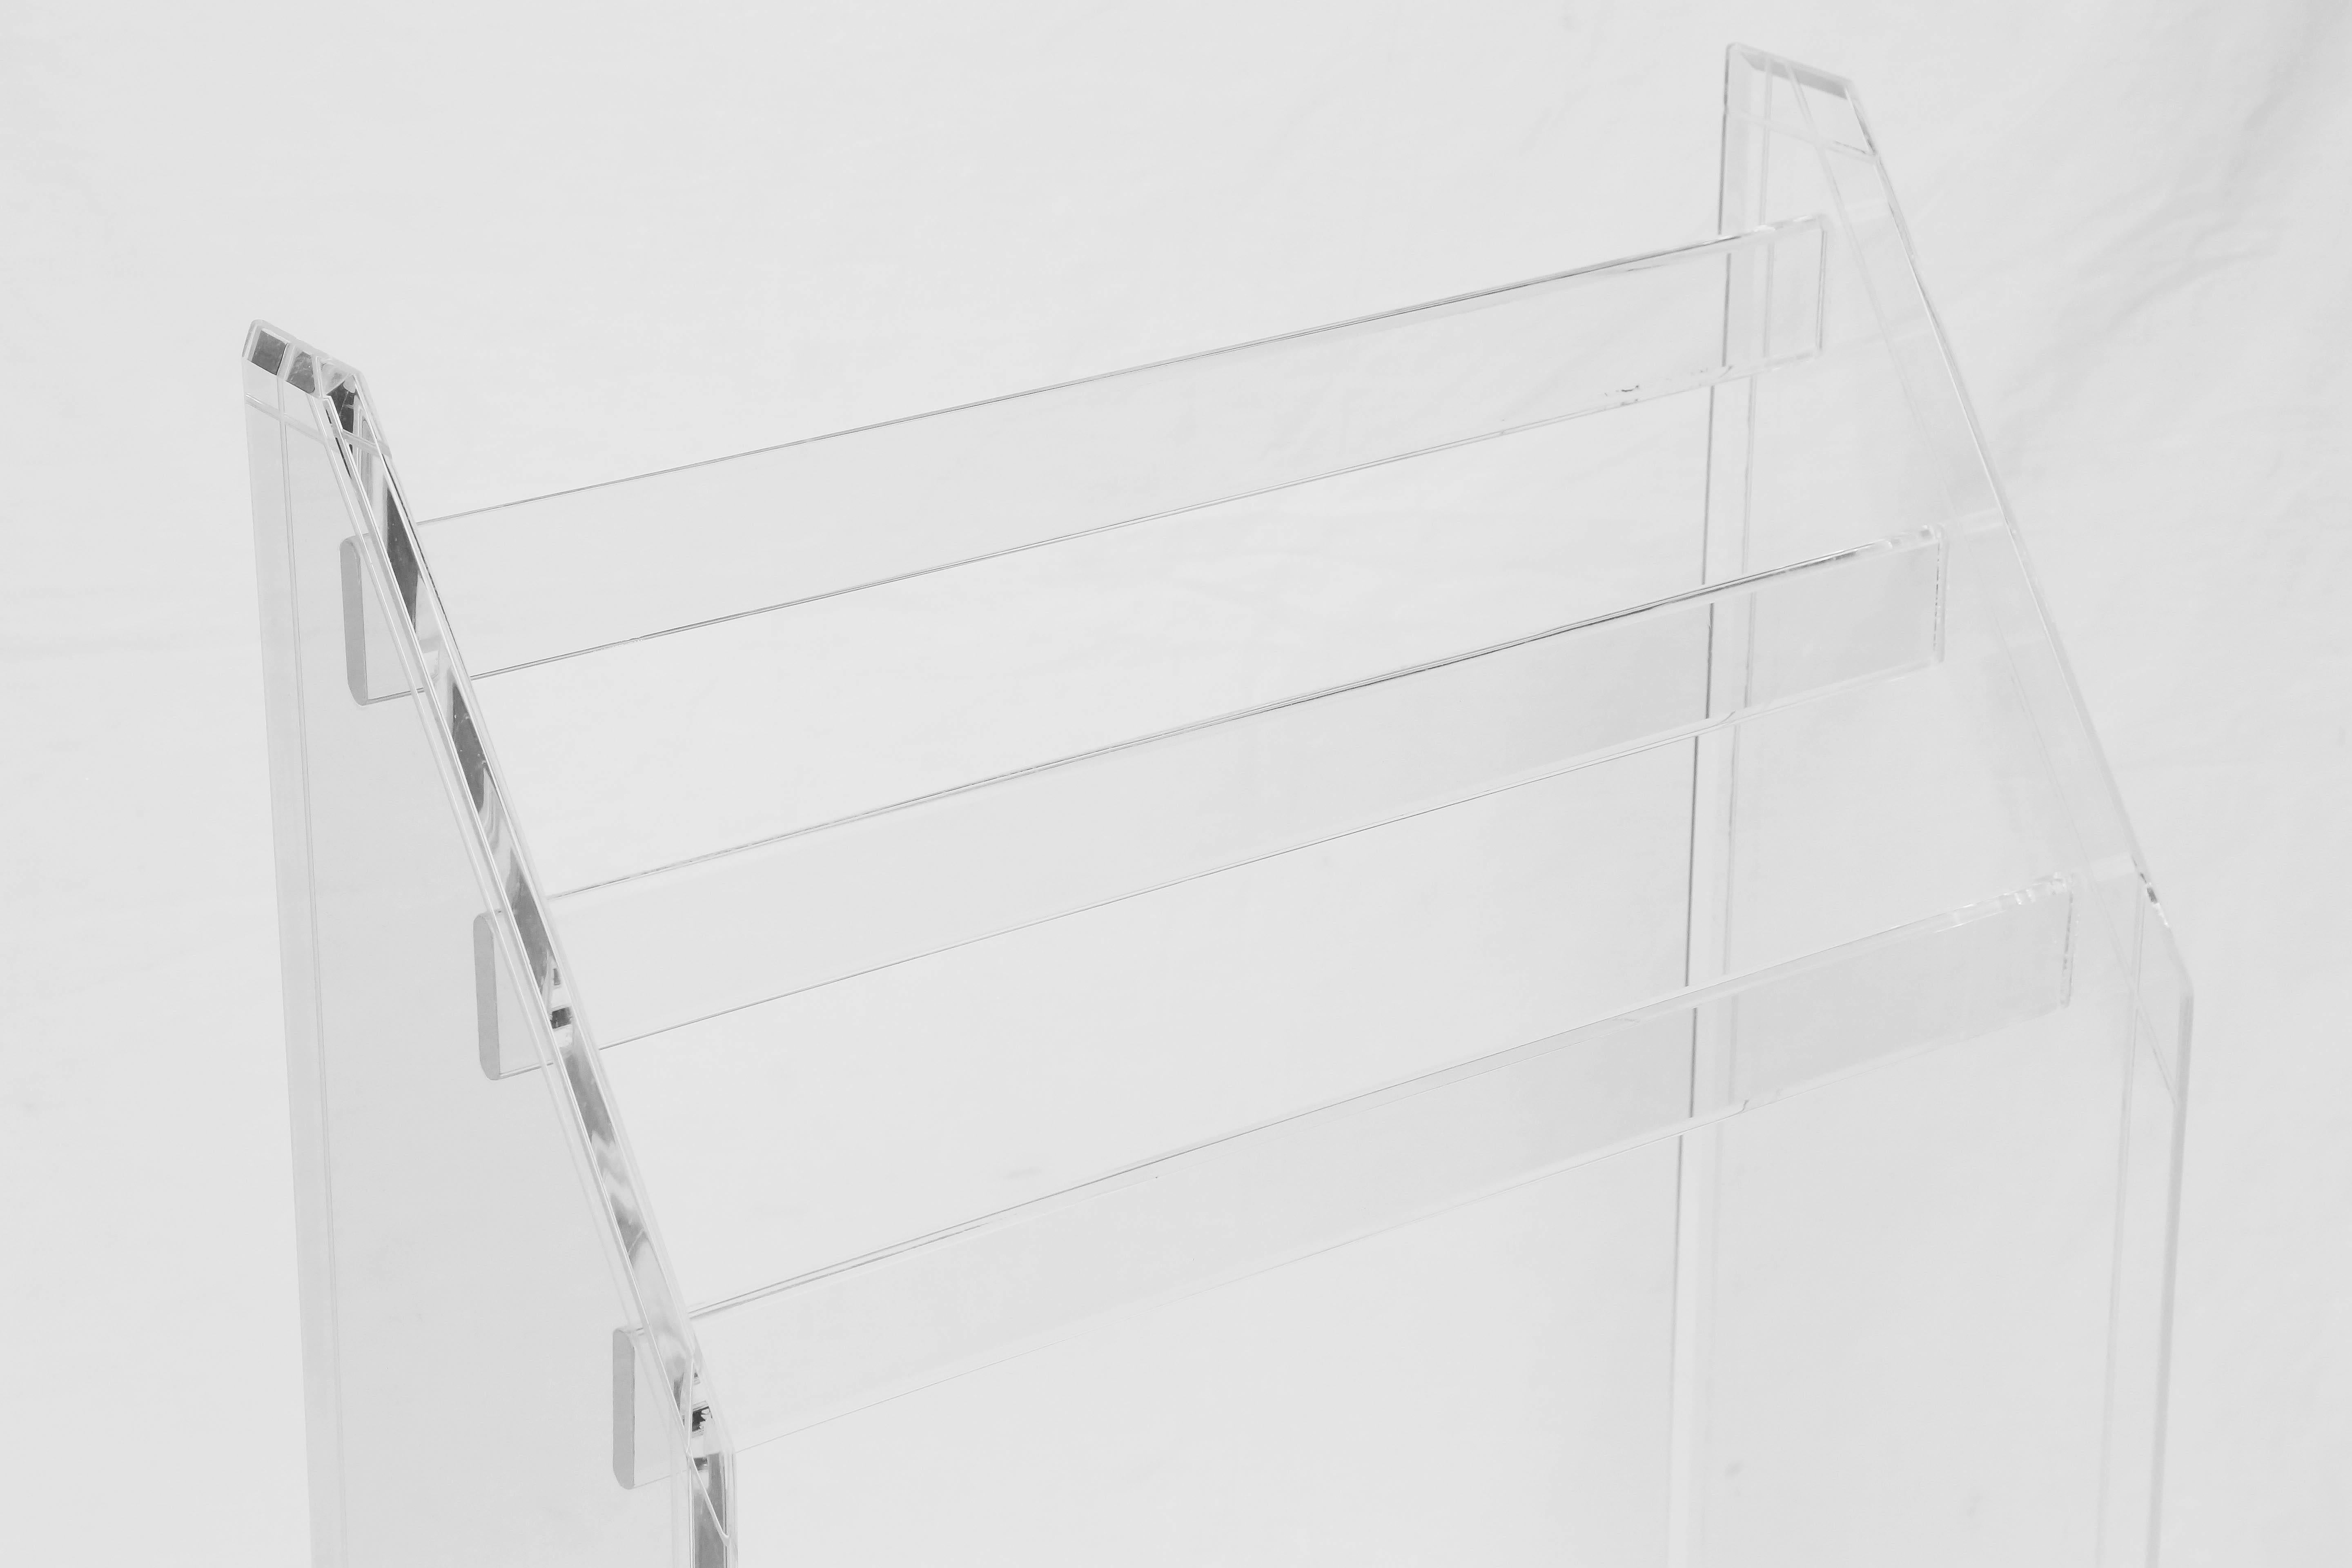 Three-tier Mid-Century Modern Lucite rack for towels or bedspreads.
This item is as functional as stylish.